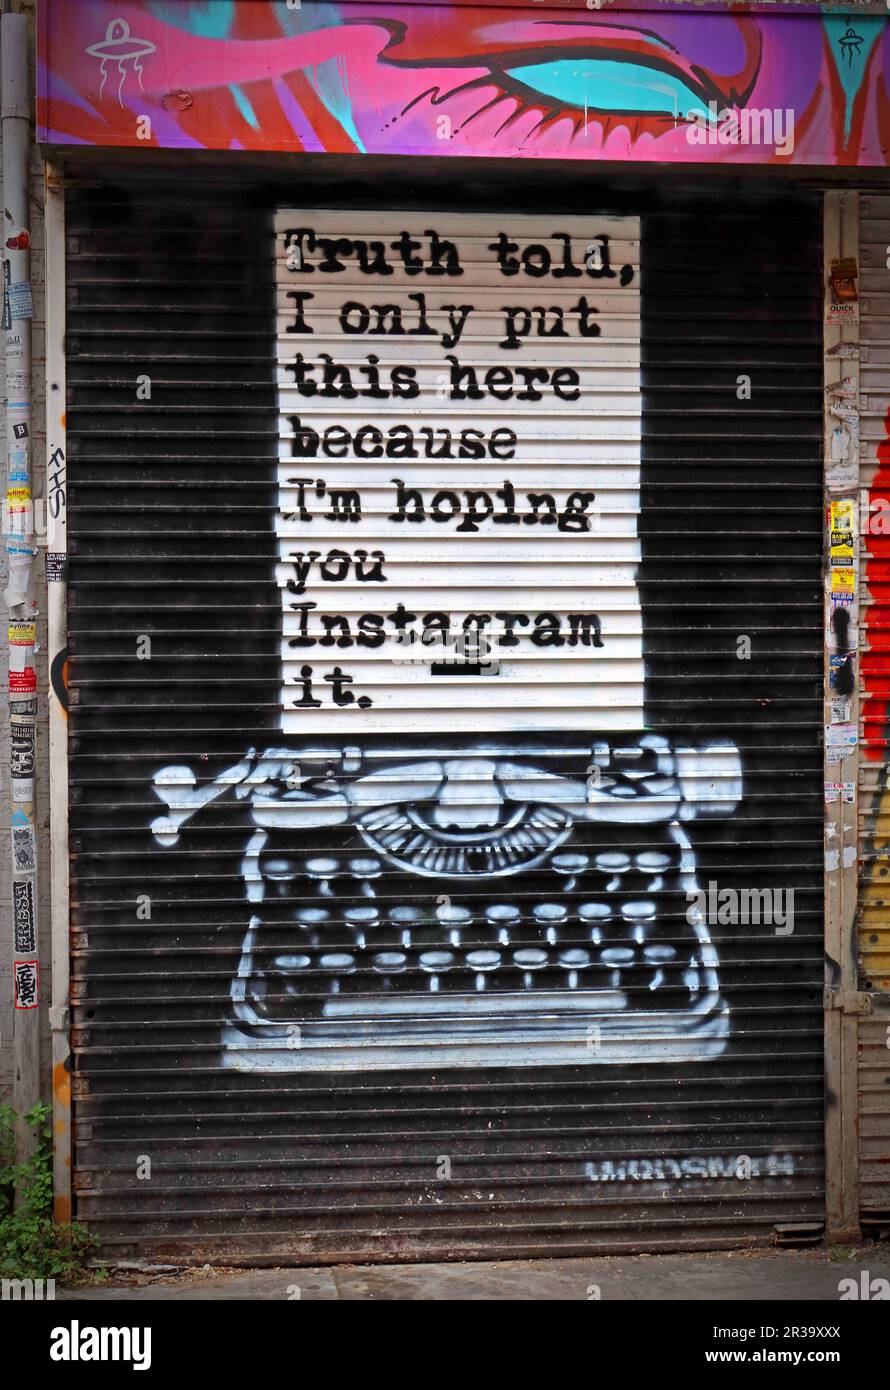 Street Art Instagram meme - Truth Told, I only put this here,because I'm hoping you Instagram It, Brick Lane, London, England, GB, E1 6QL Stock Photo